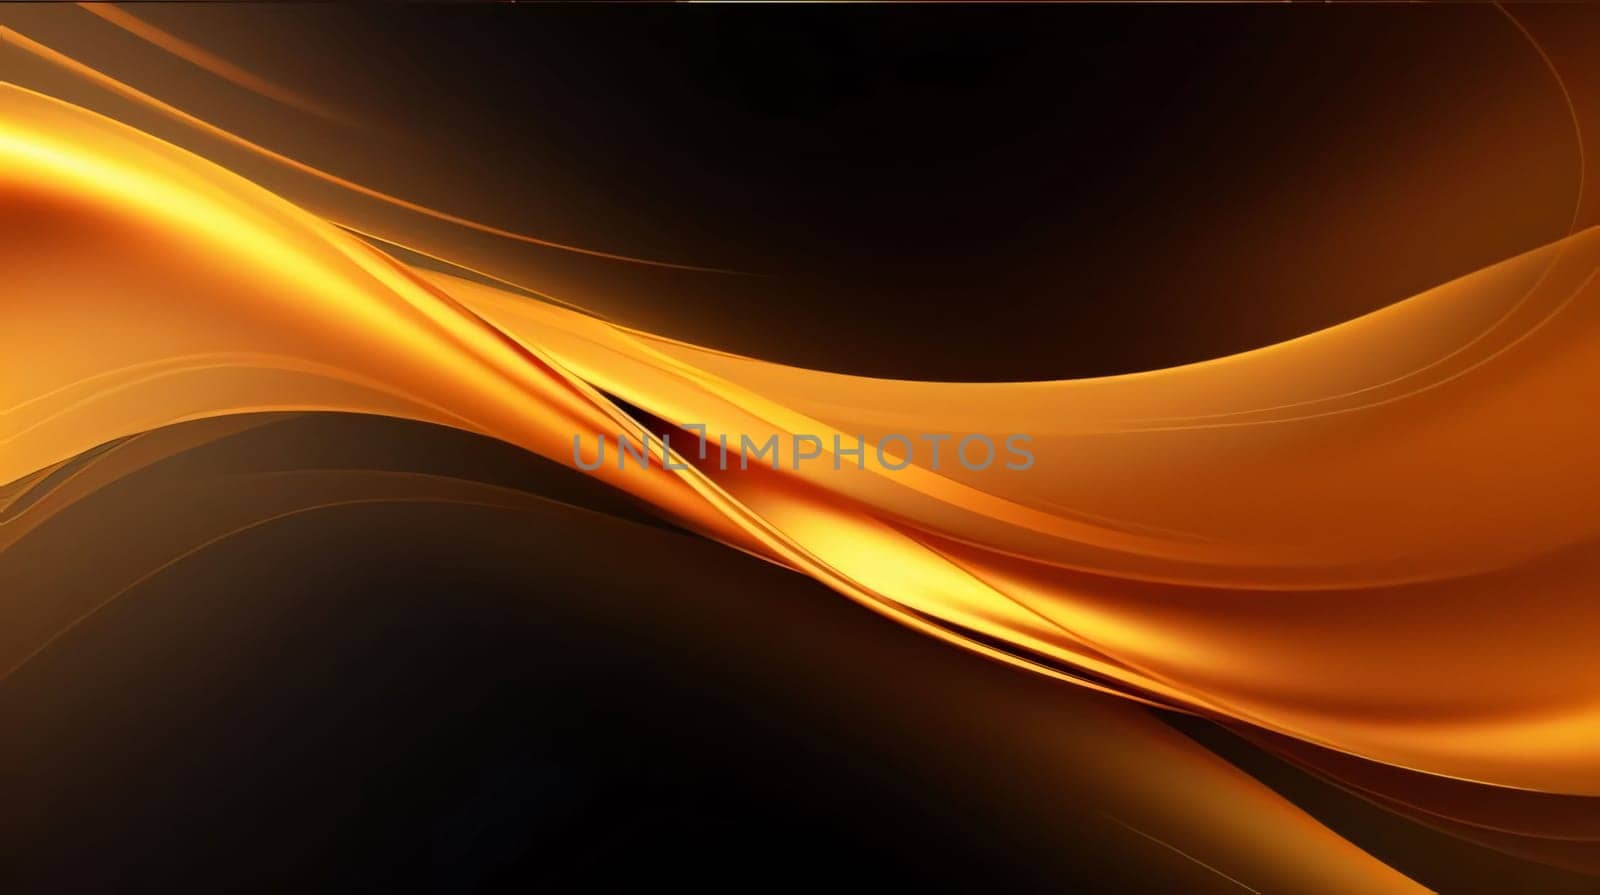 Abstract background design: abstract orange background with smooth lines and space for text or image